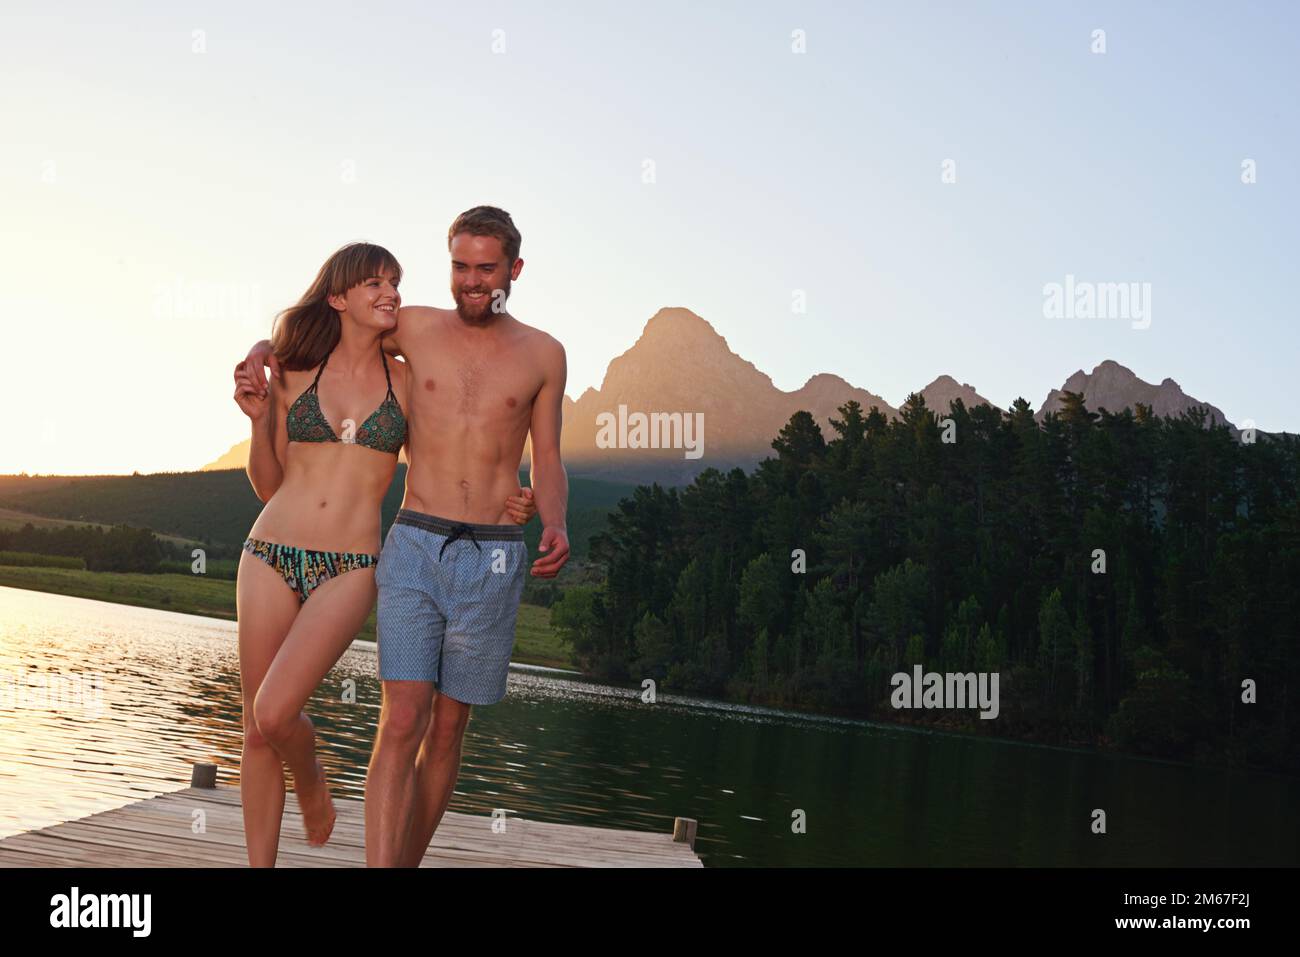 Love and laughter at the lake. an affectionate young couple in swimsuits walking on a dock at sunset. Stock Photo